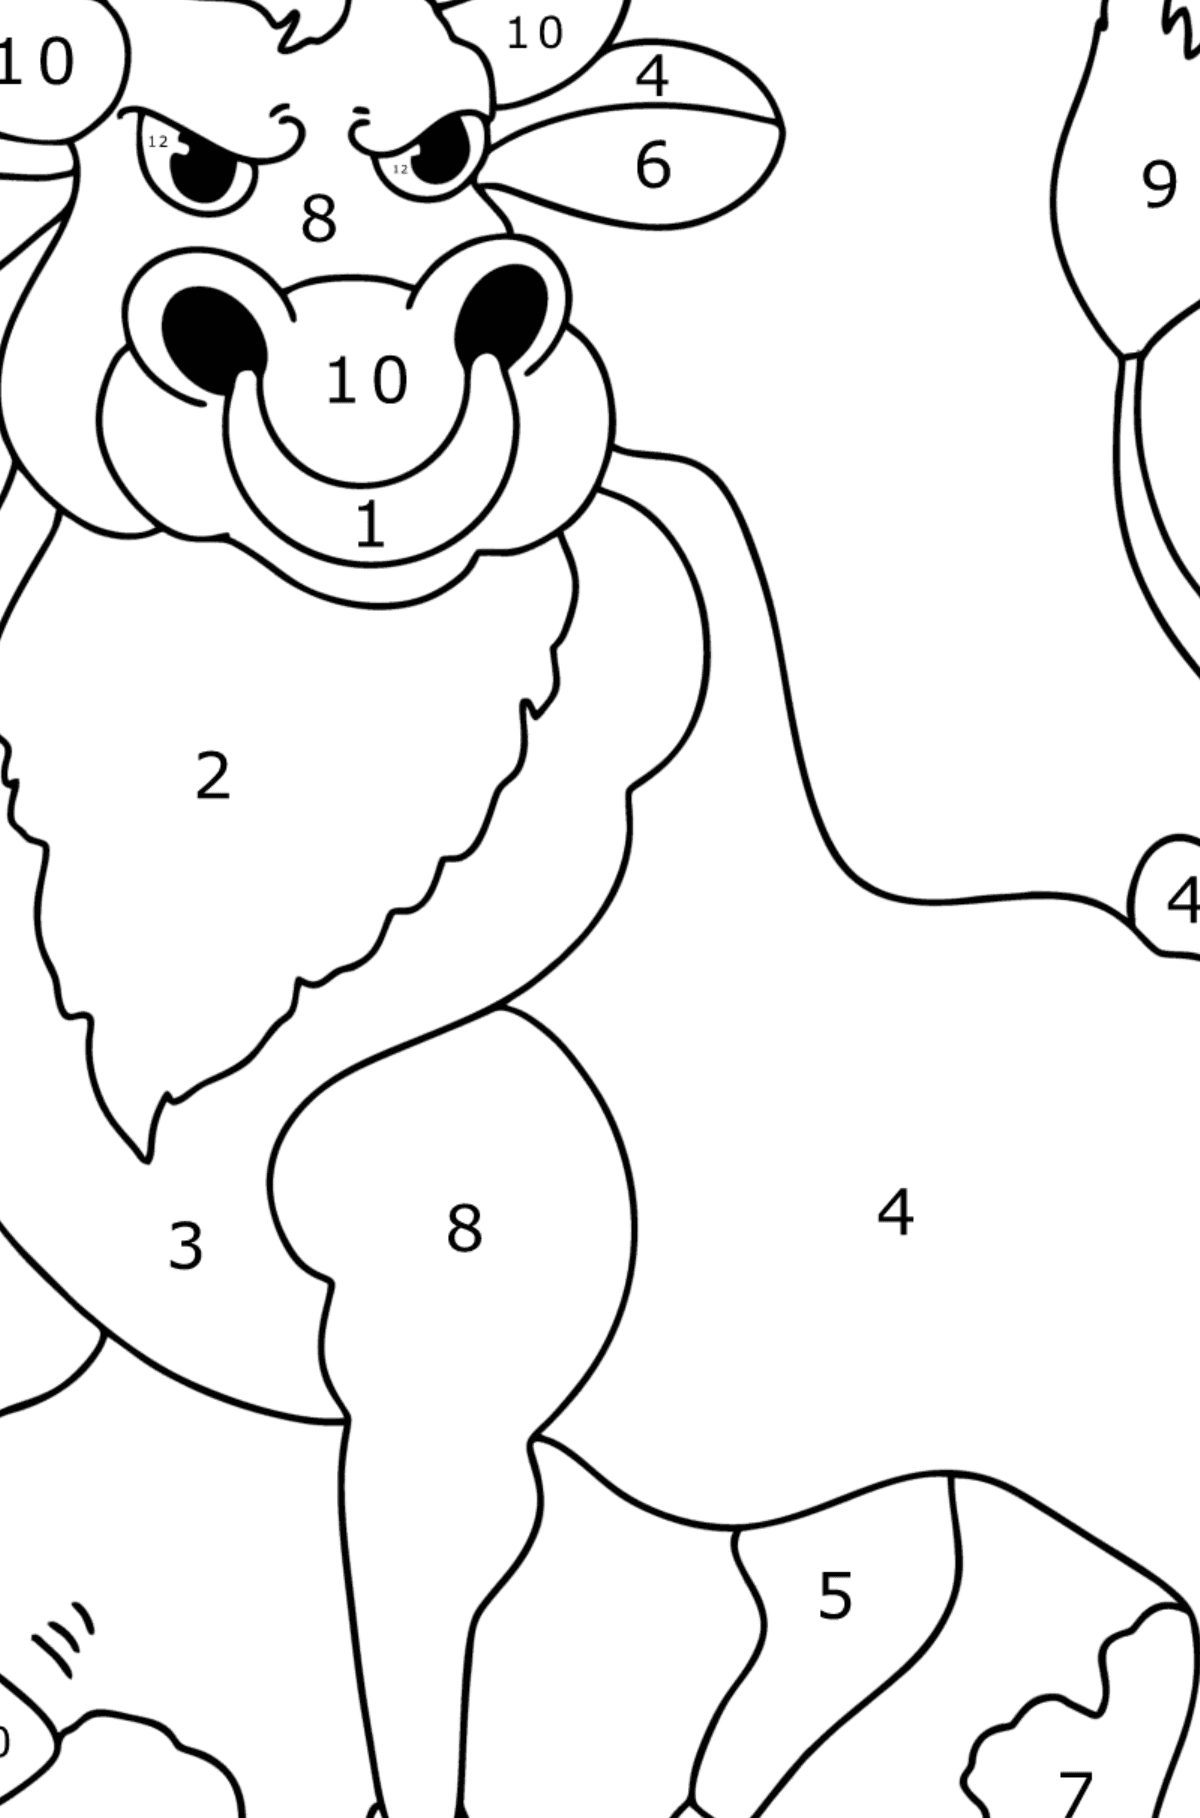 Brave bull Coloring page - Coloring by Numbers for Kids